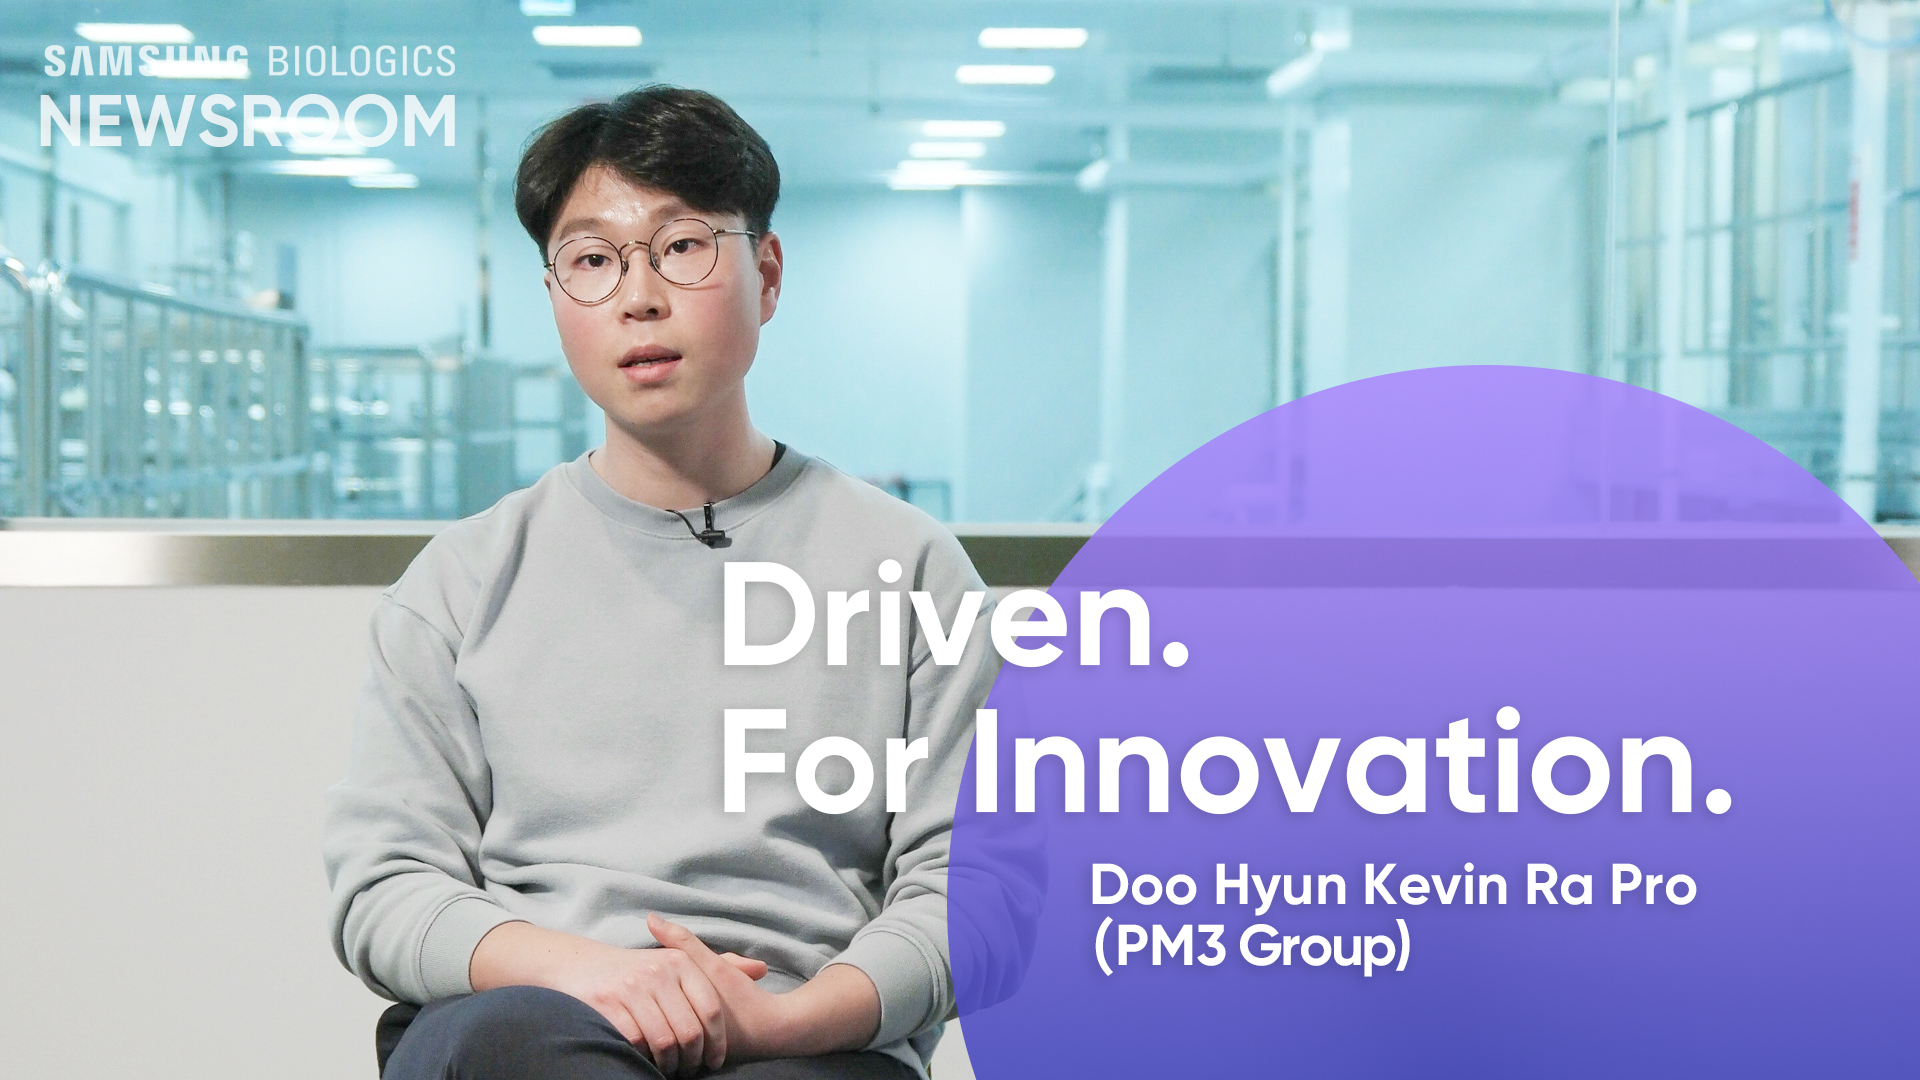 Driven. For Innovation. Doo Hyun Kevin Ra Pro(PM3 Group)